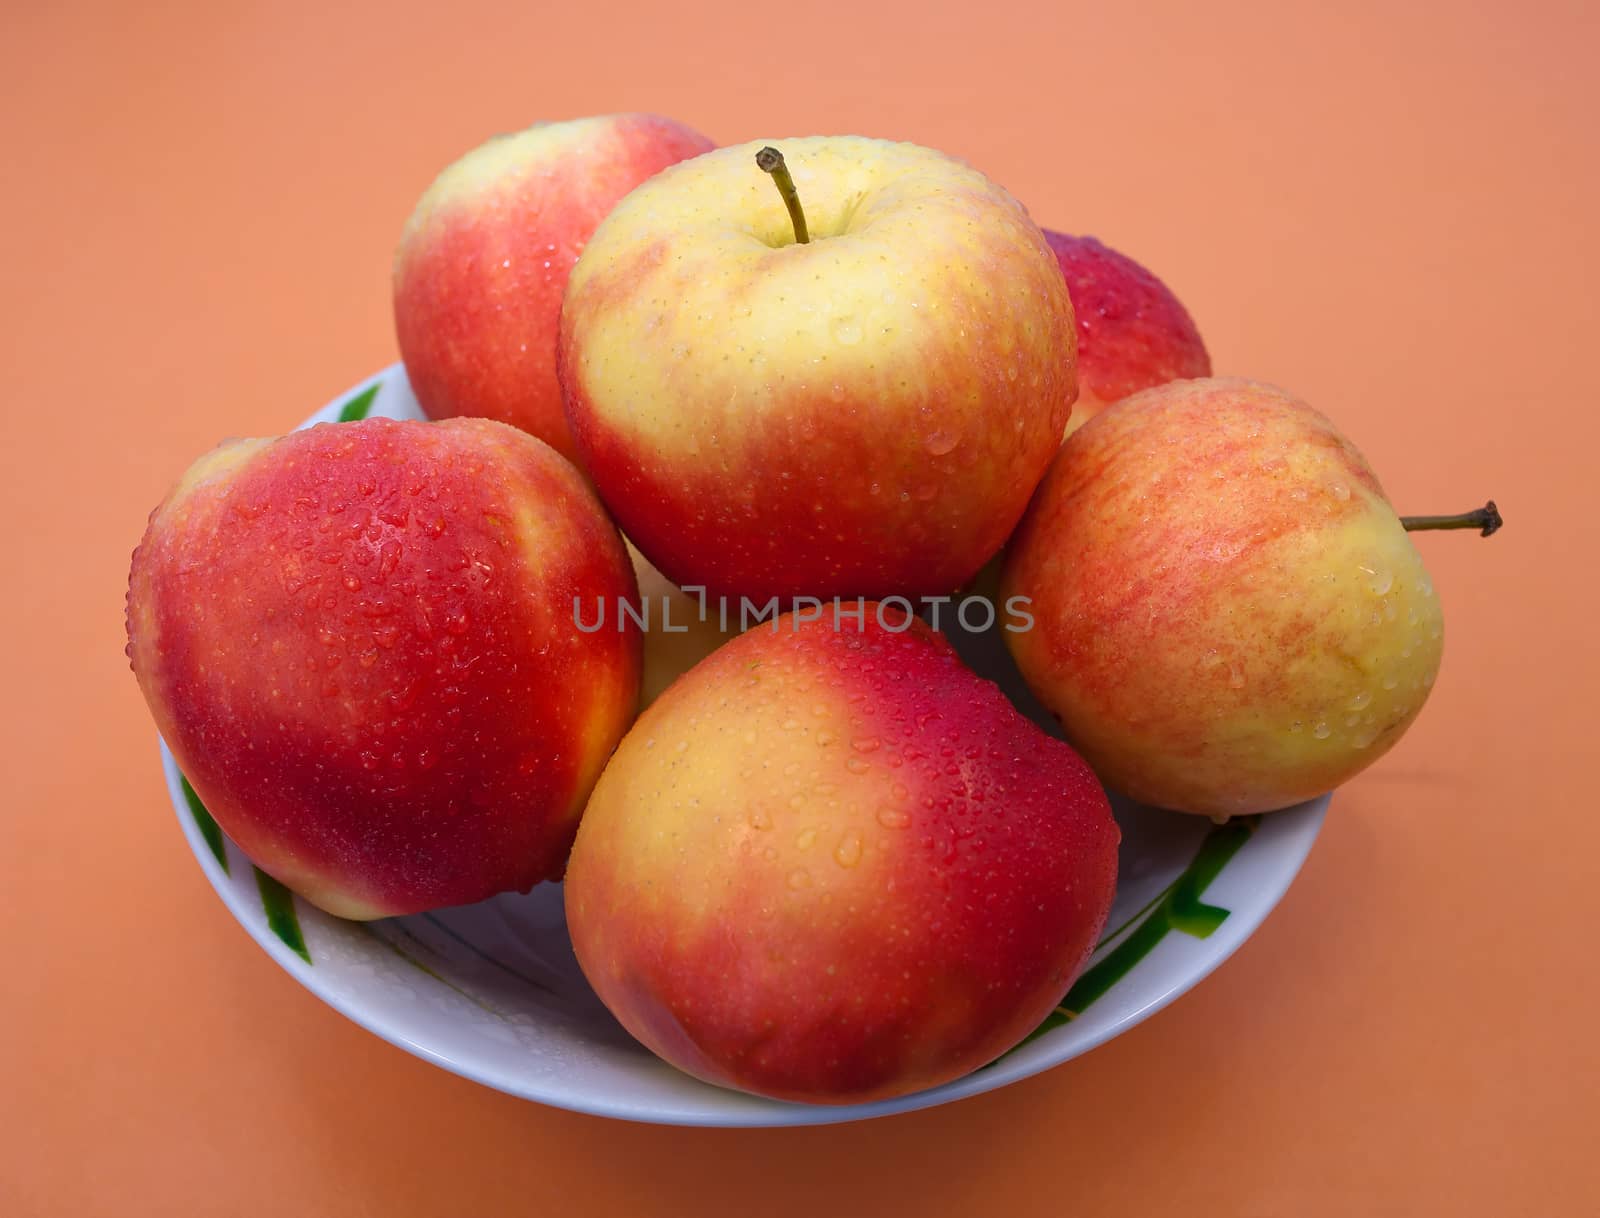 Red and yellow apples with kalyami water on their surface in the plate on an orange background